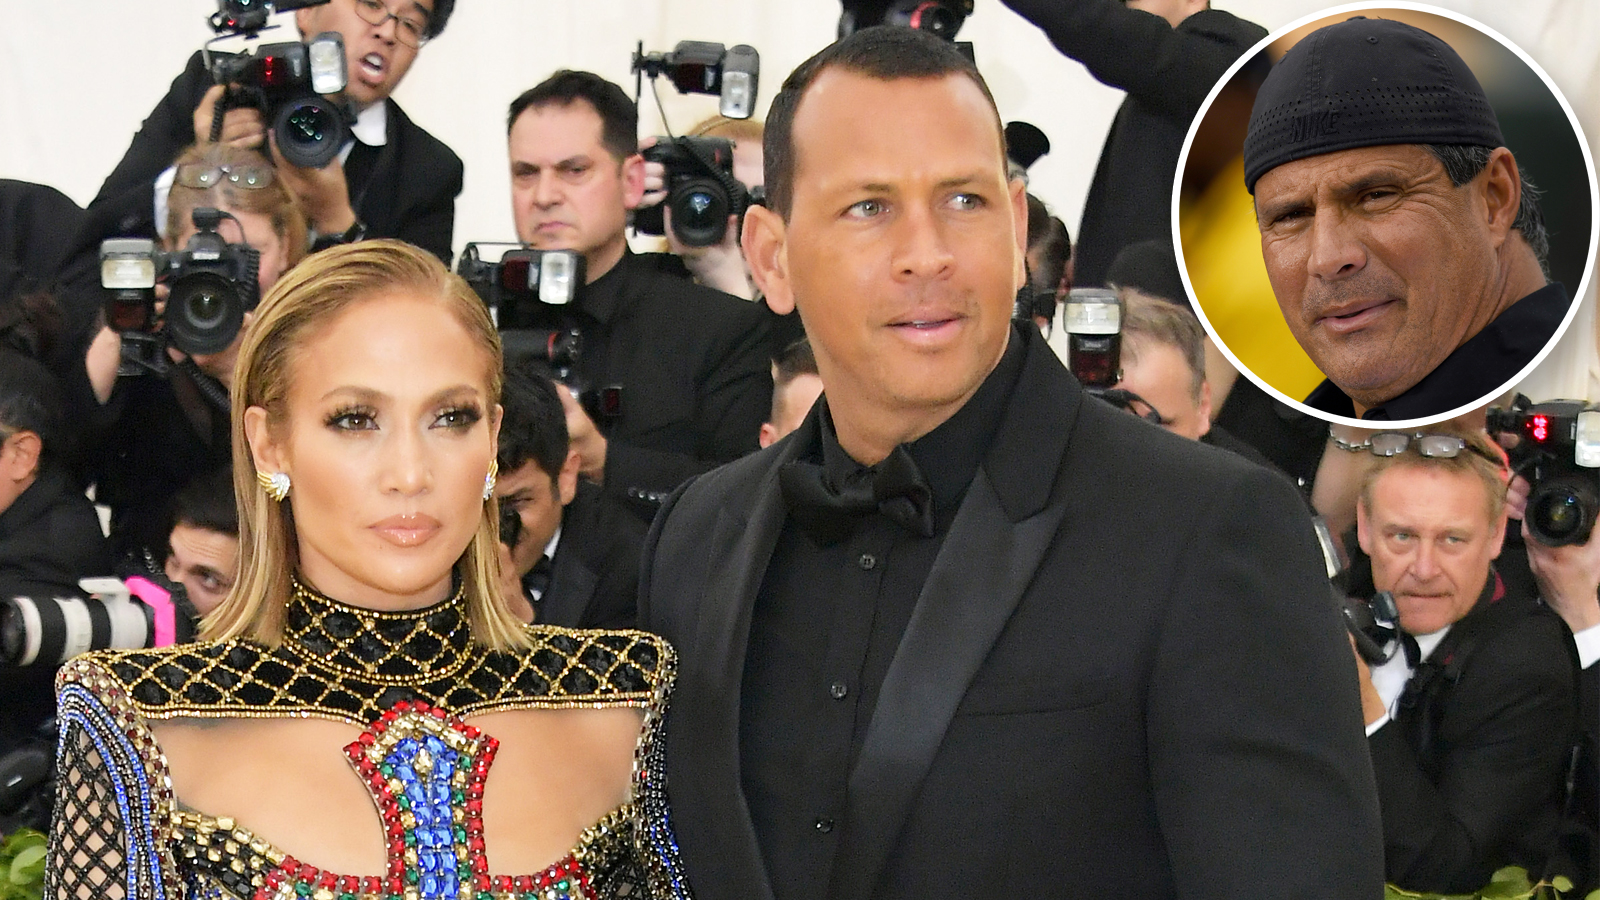 Is He Serious? Jose Canseco Accuses Alex Rodriguez of Cheating on Jennifer Lopez with His Ex-Wife.